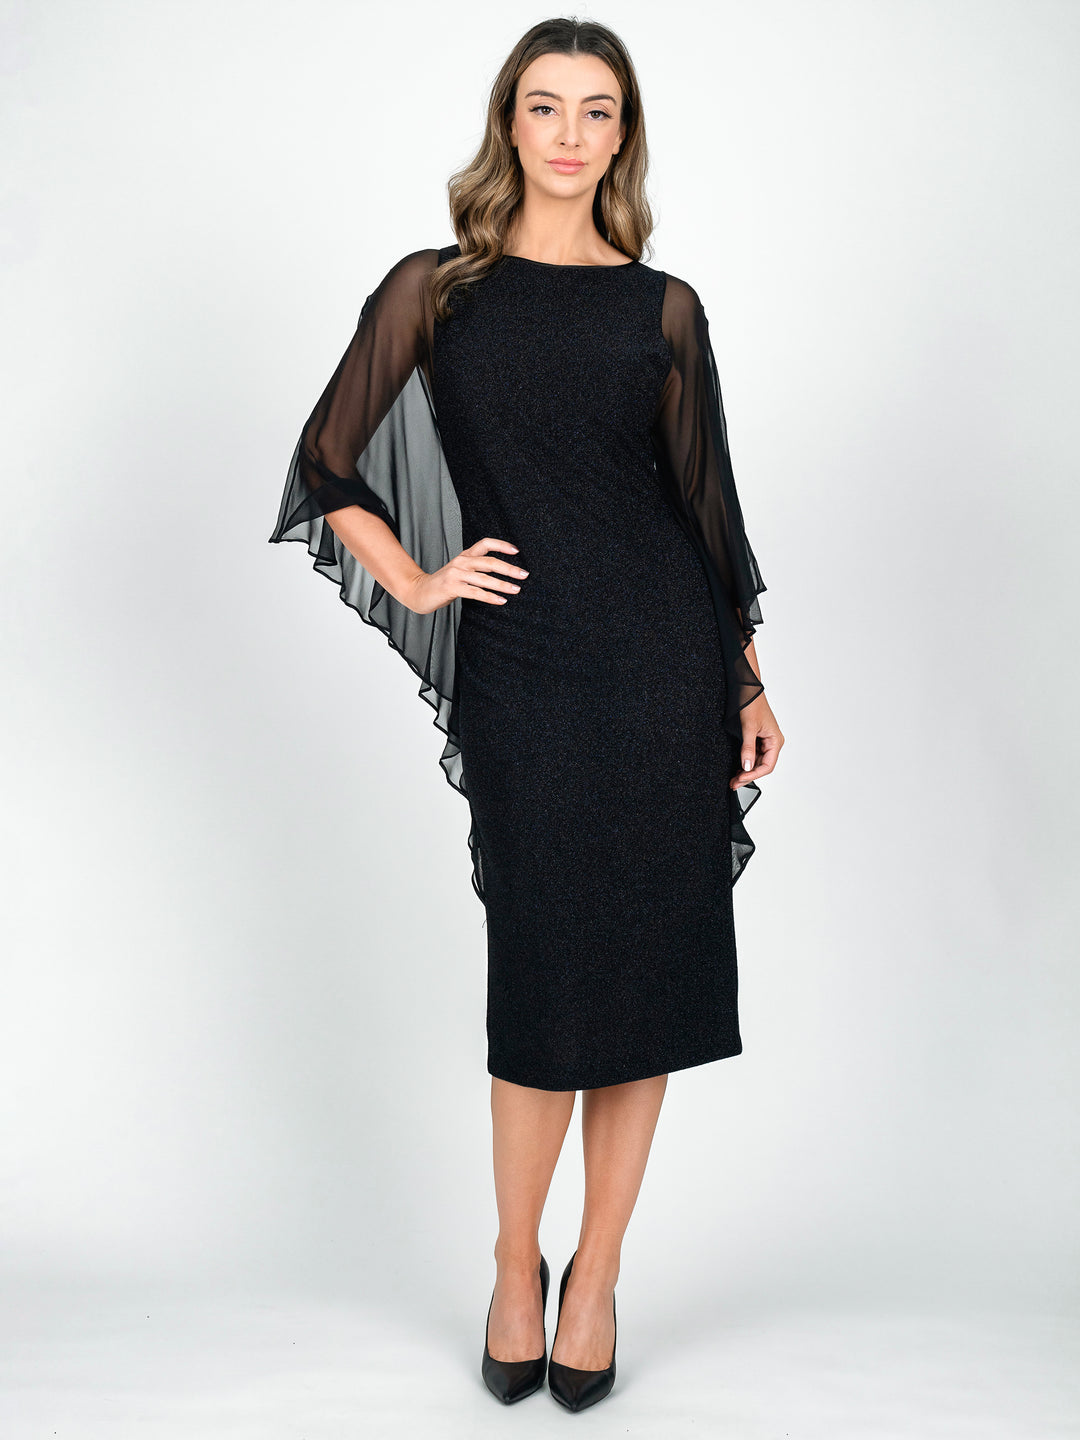 Black sparkly knee length cocktail dress with flowy silk sleeves